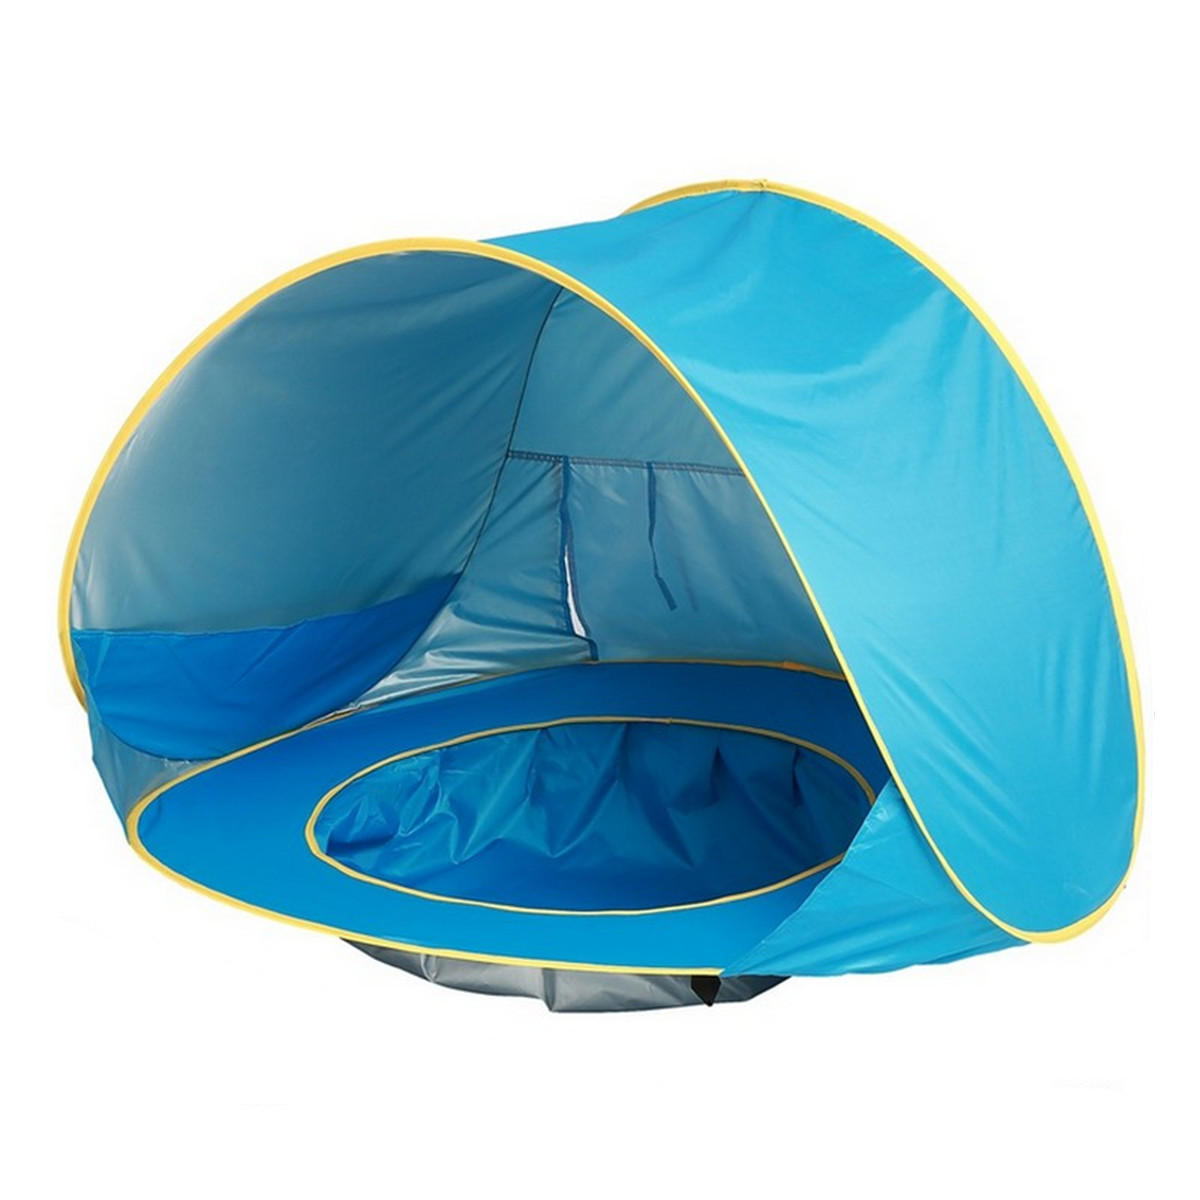 Baby Beach Tent UV-protecting Sunshelter with Pool Waterproof Pop Up Awning Outdoor Camping Sunshade